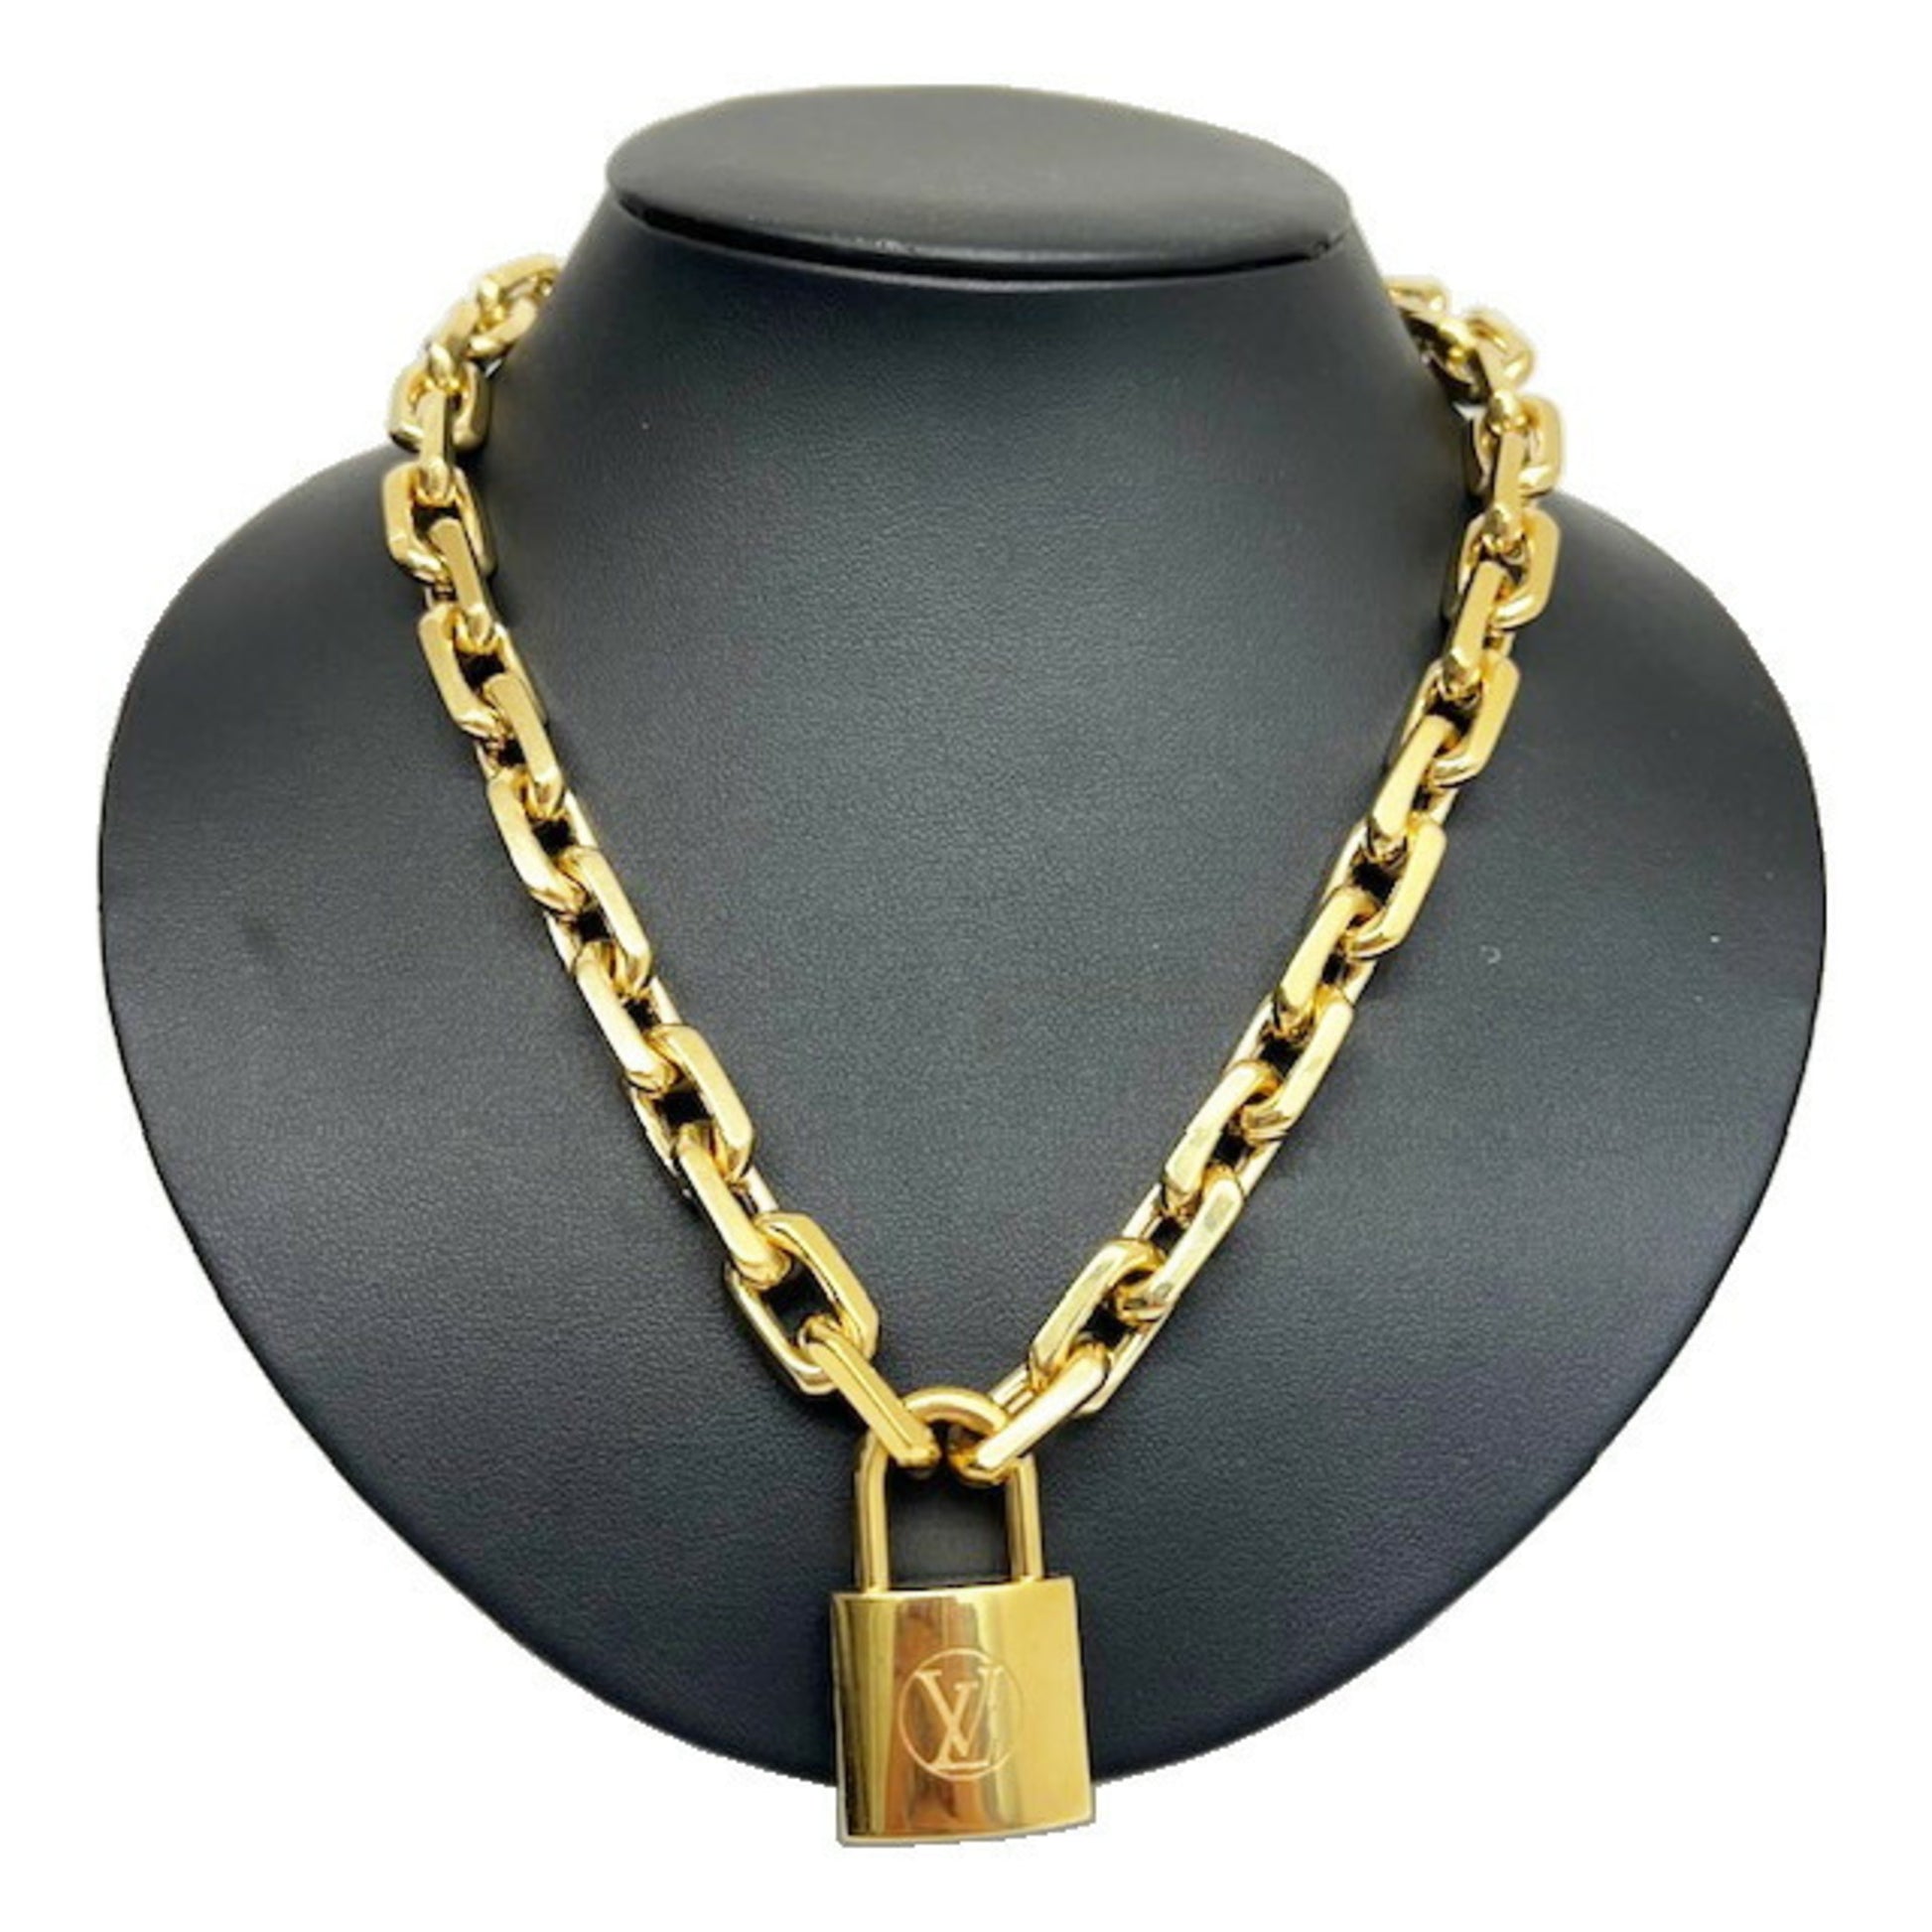 Buy Louis Vuitton LOUISVUITTON Size:-MP2993 Collier LV Edge Cadena Gold  Necklace from Japan - Buy authentic Plus exclusive items from Japan